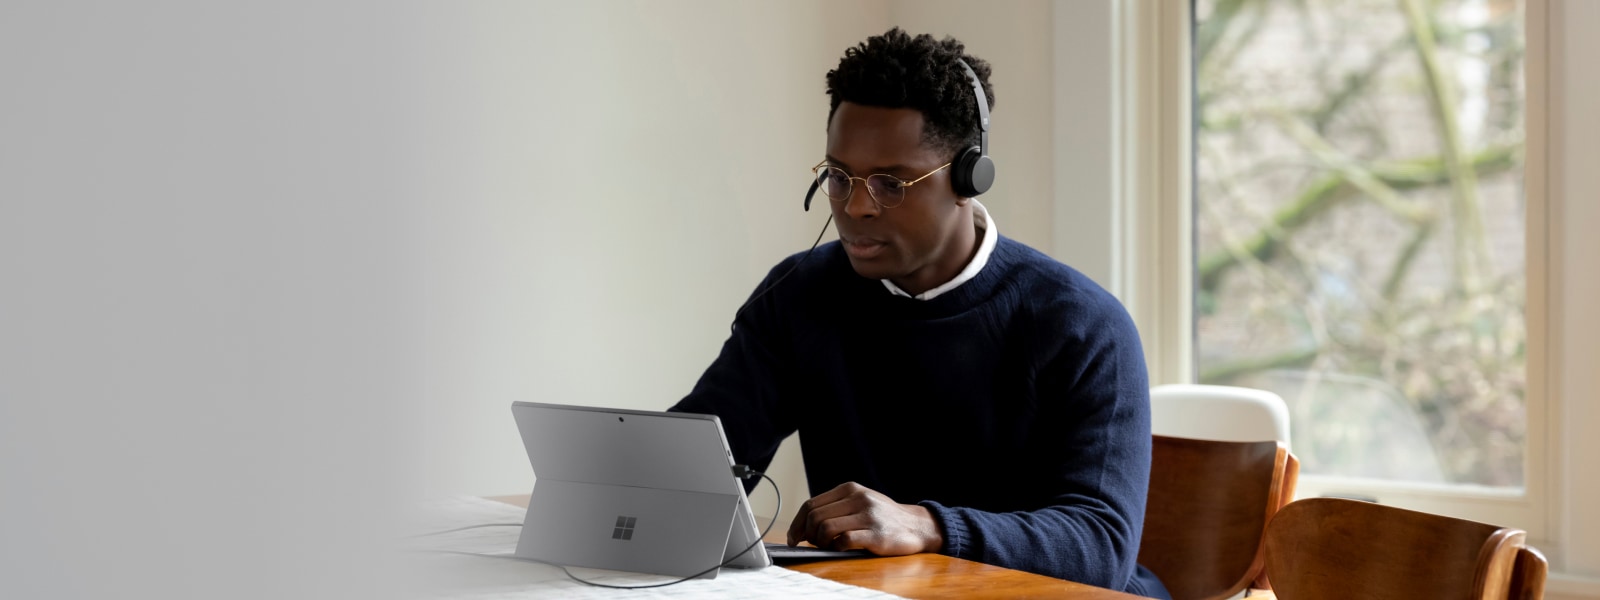 Adult inside using Microsoft Modern USB Headset and Surface Pro